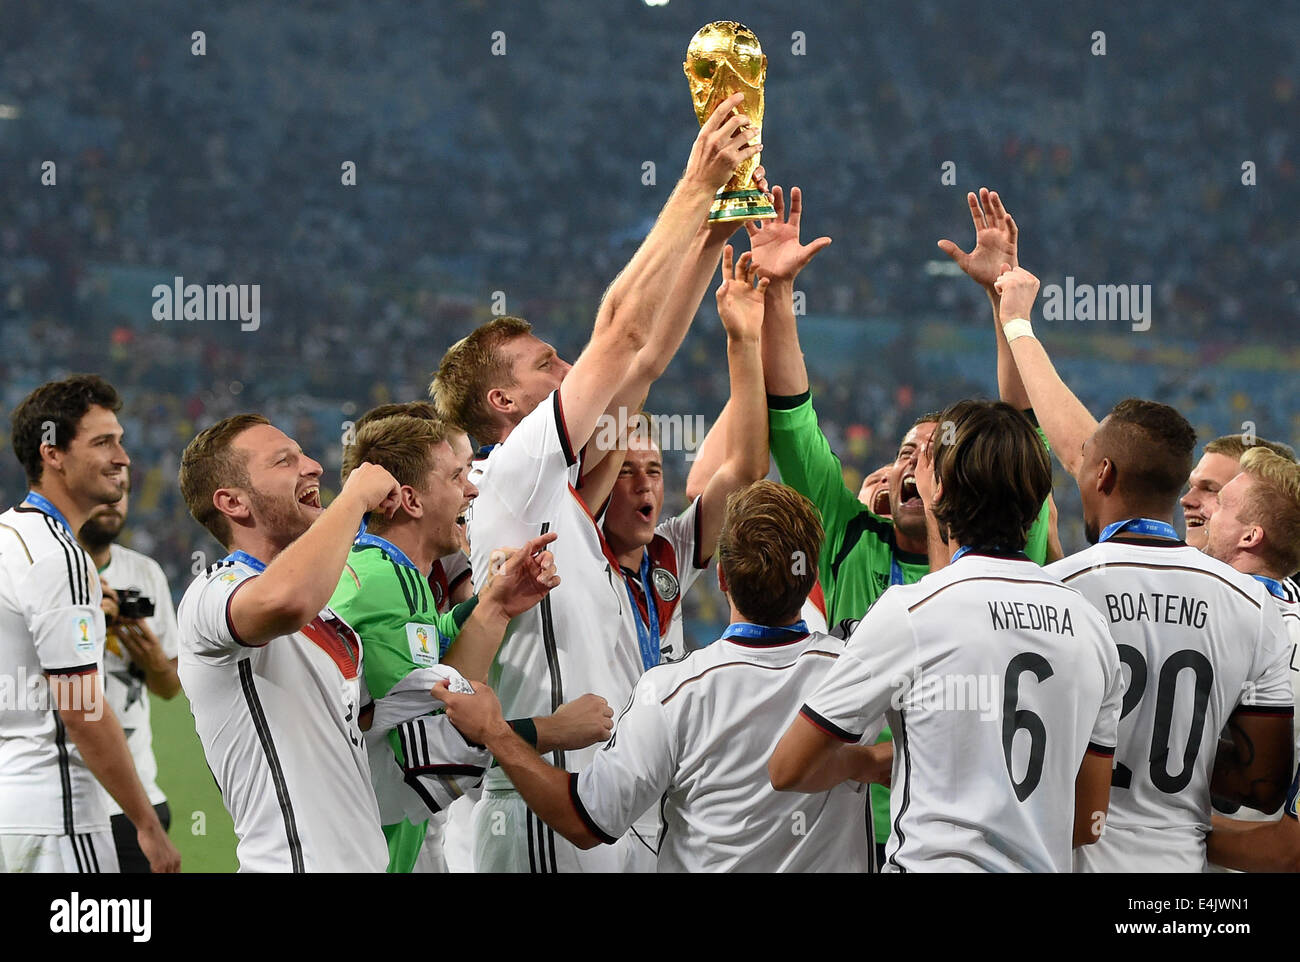 Rio de Janeiro, Brazil. 13th July, 2014. Per Mertesacker (C) of Germany lifts up the World Cup trophy between his teammates after winning the FIFA World Cup 2014 final soccer match between Germany and Argentina at the Estadio do Maracana in Rio de Janeiro, Brazil, 13 July 2014. Photo: Marcus Brandt/dpa/Alamy Live News Stock Photo